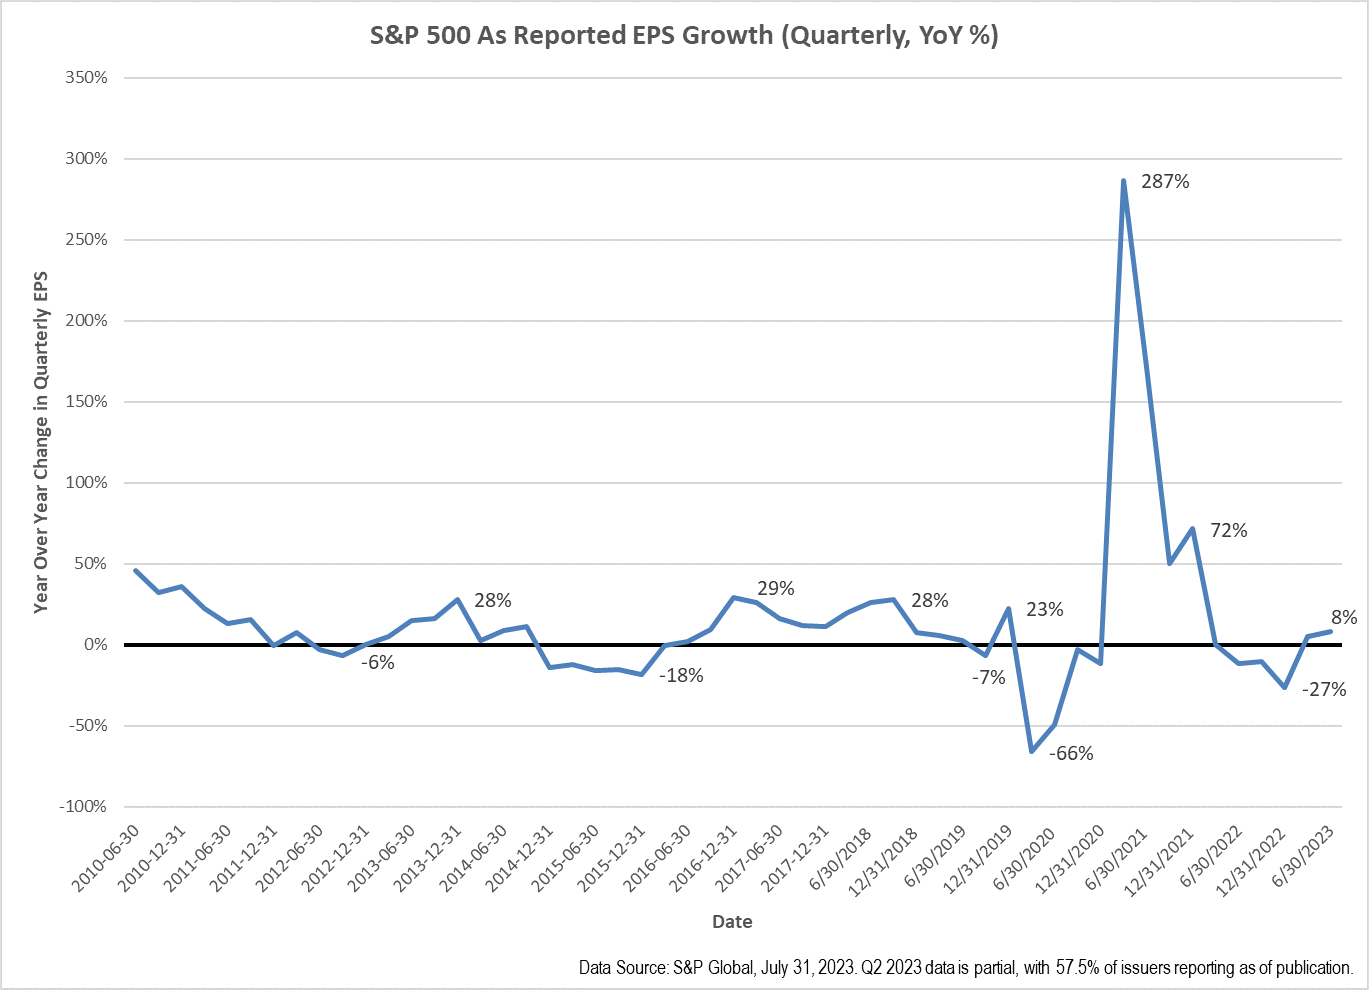 S and P 500 index as reported EPS growth, quarterly, year over year percentage